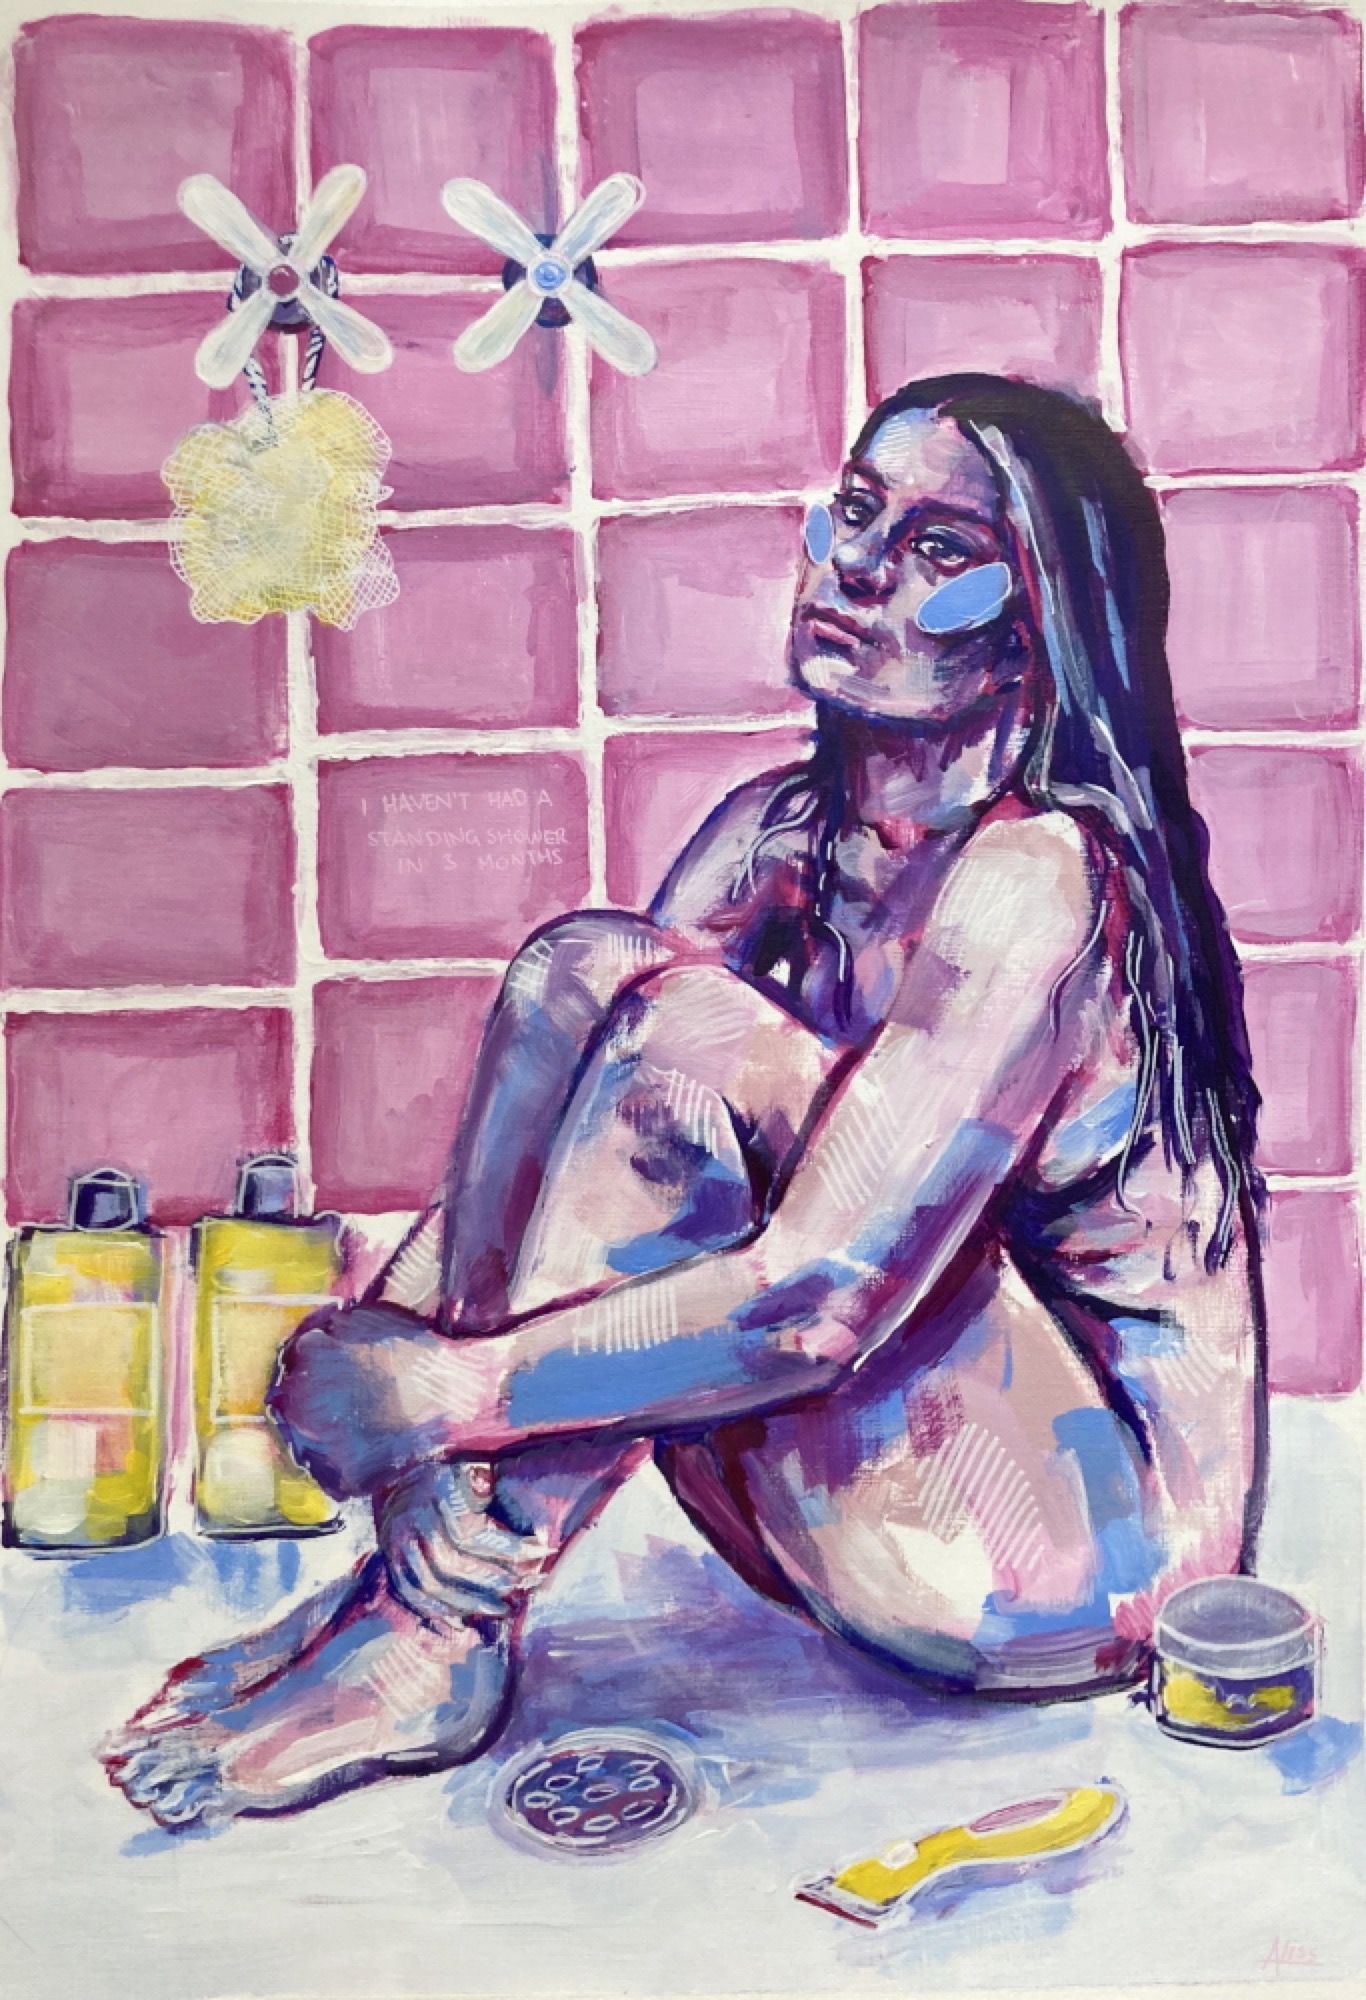 Aliss Rigby, <em>I HAVEN’T HAD A STANDING SHOWER IN 3 MONTHS</em>, 2020, Acrylic on paper, 42cm x 59cm. Courtesy of the artist.